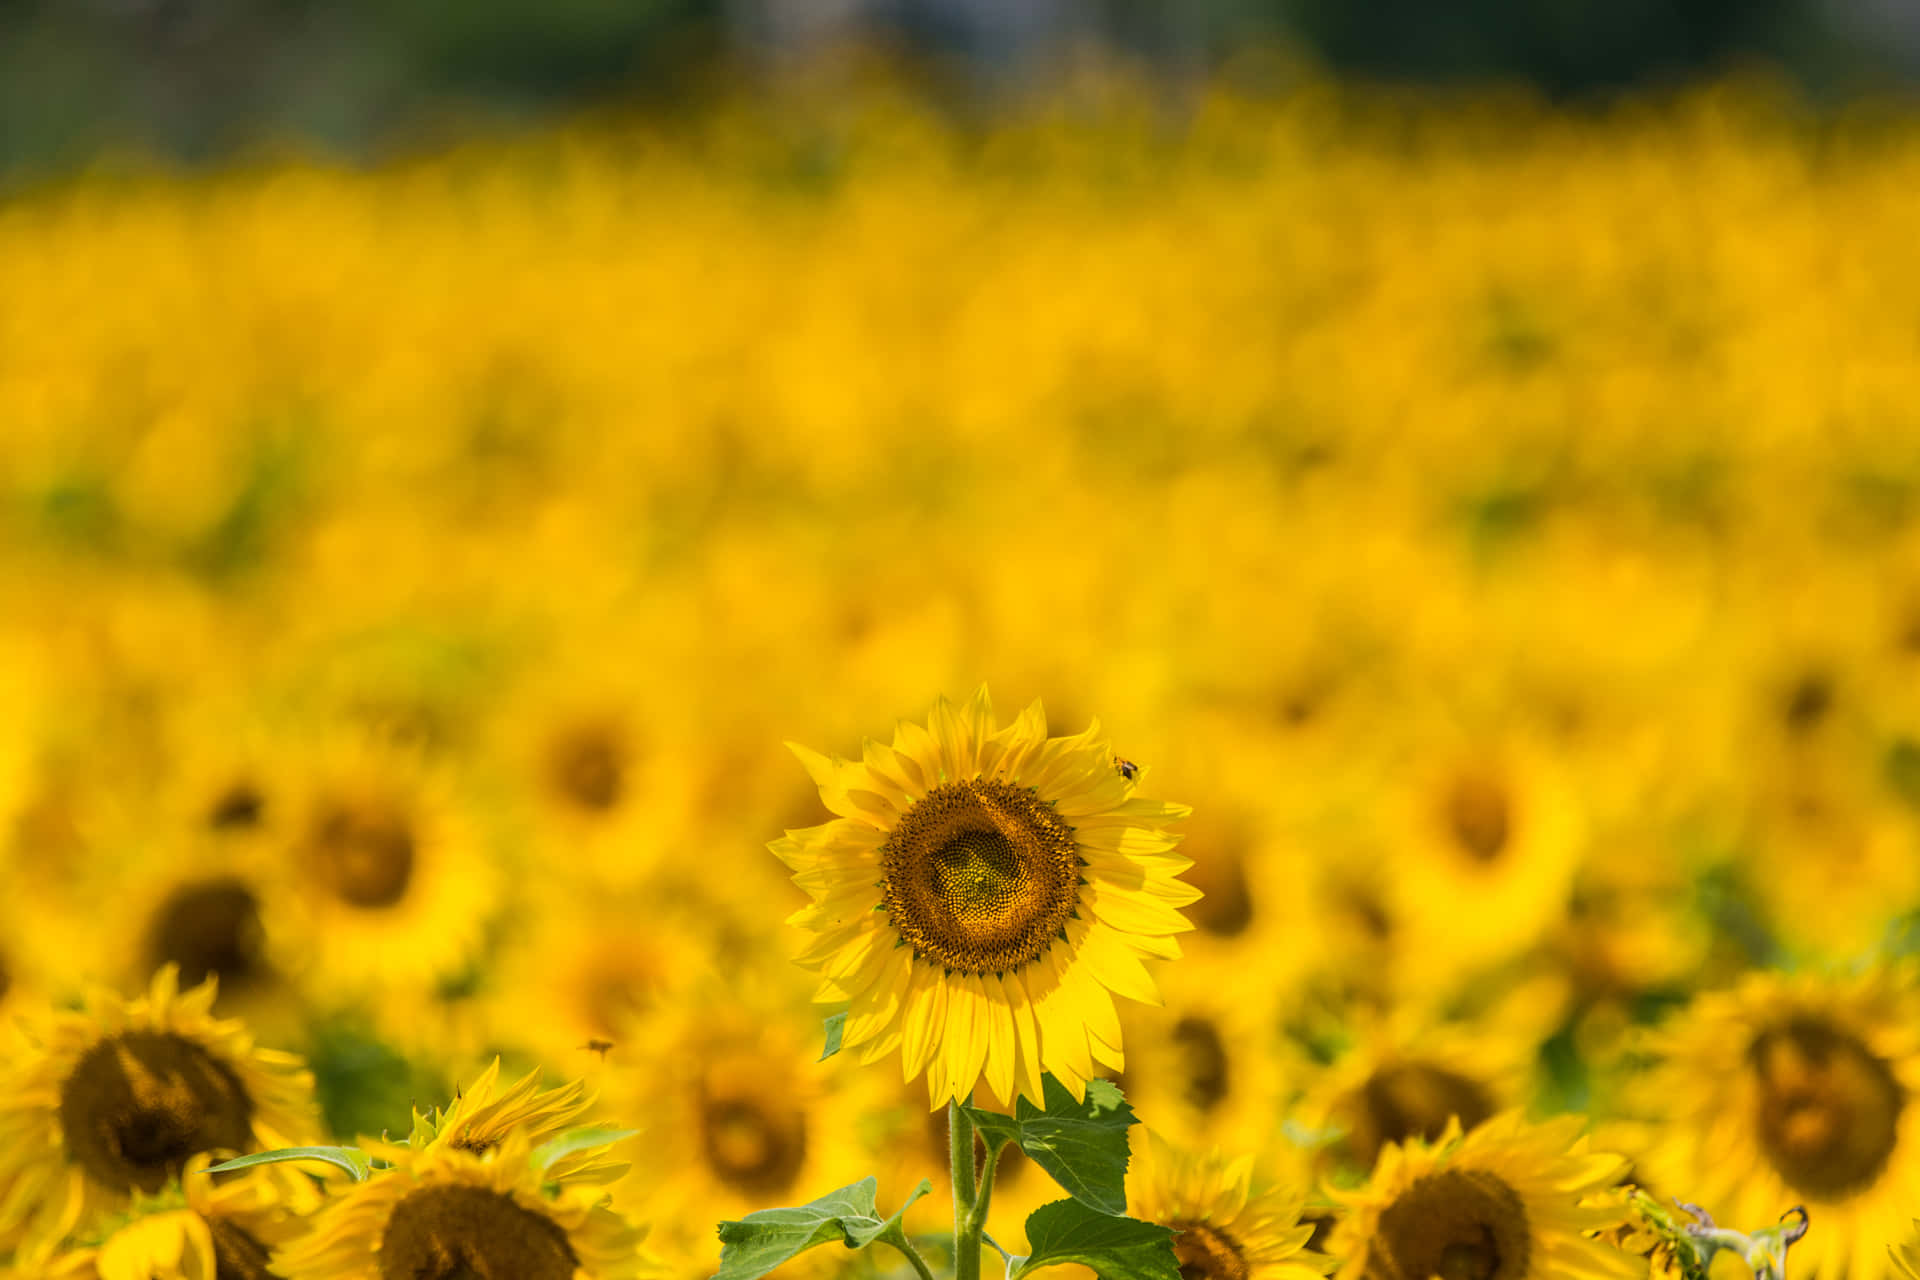 Brightening any day with a sunflower Wallpaper